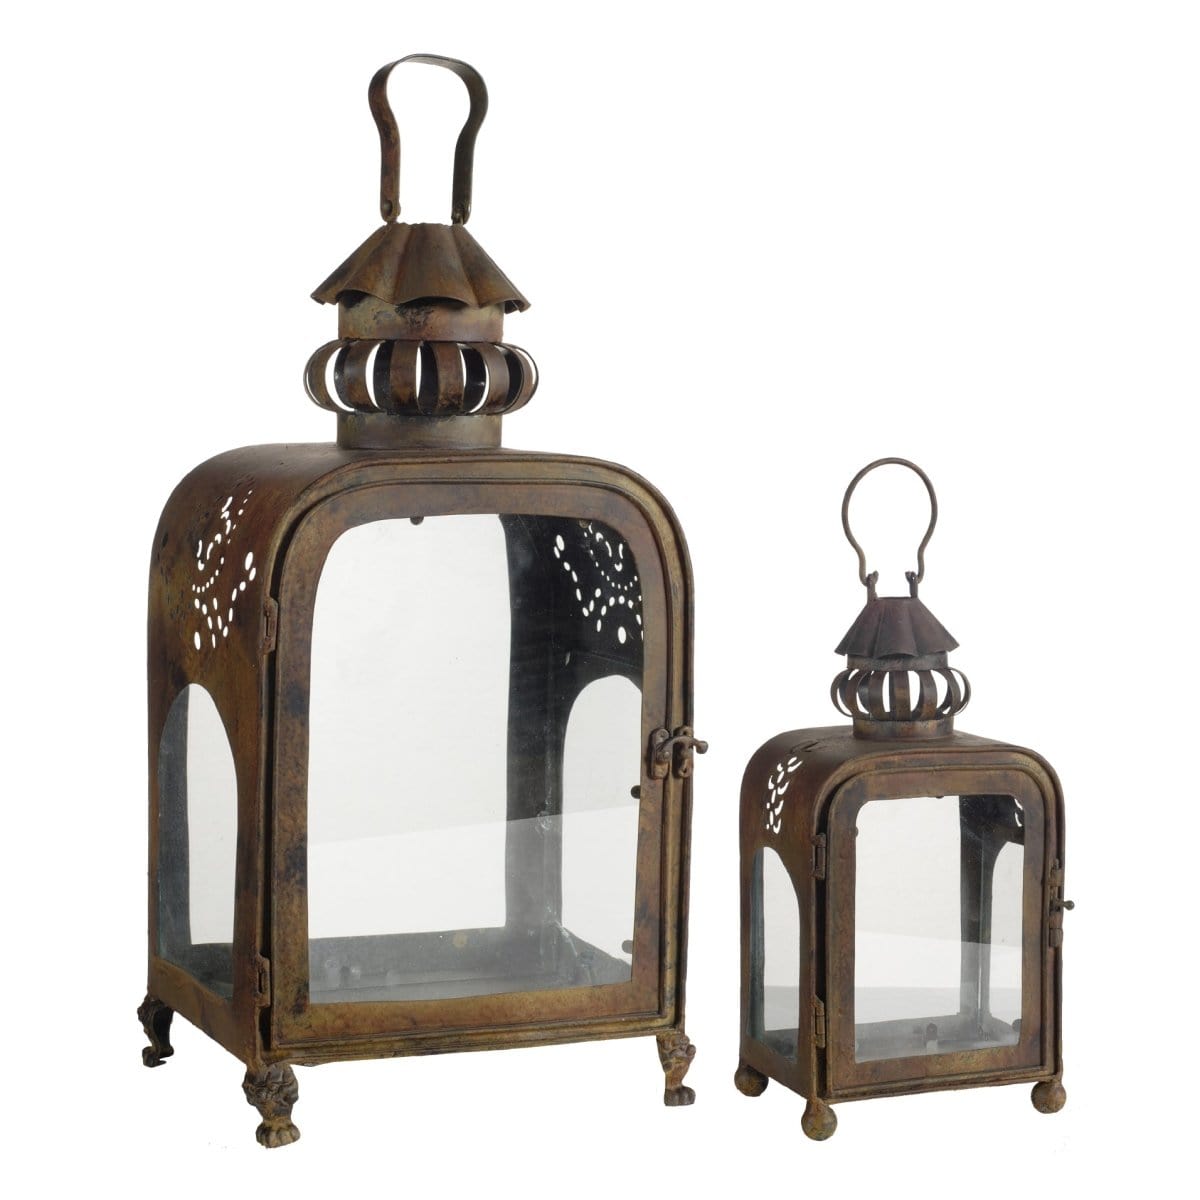 AB-31435 S/2 Gibson Speakeasy Candle  Lanterns L:10.5X8X24" S:6.5X5X15.5" picket and rail